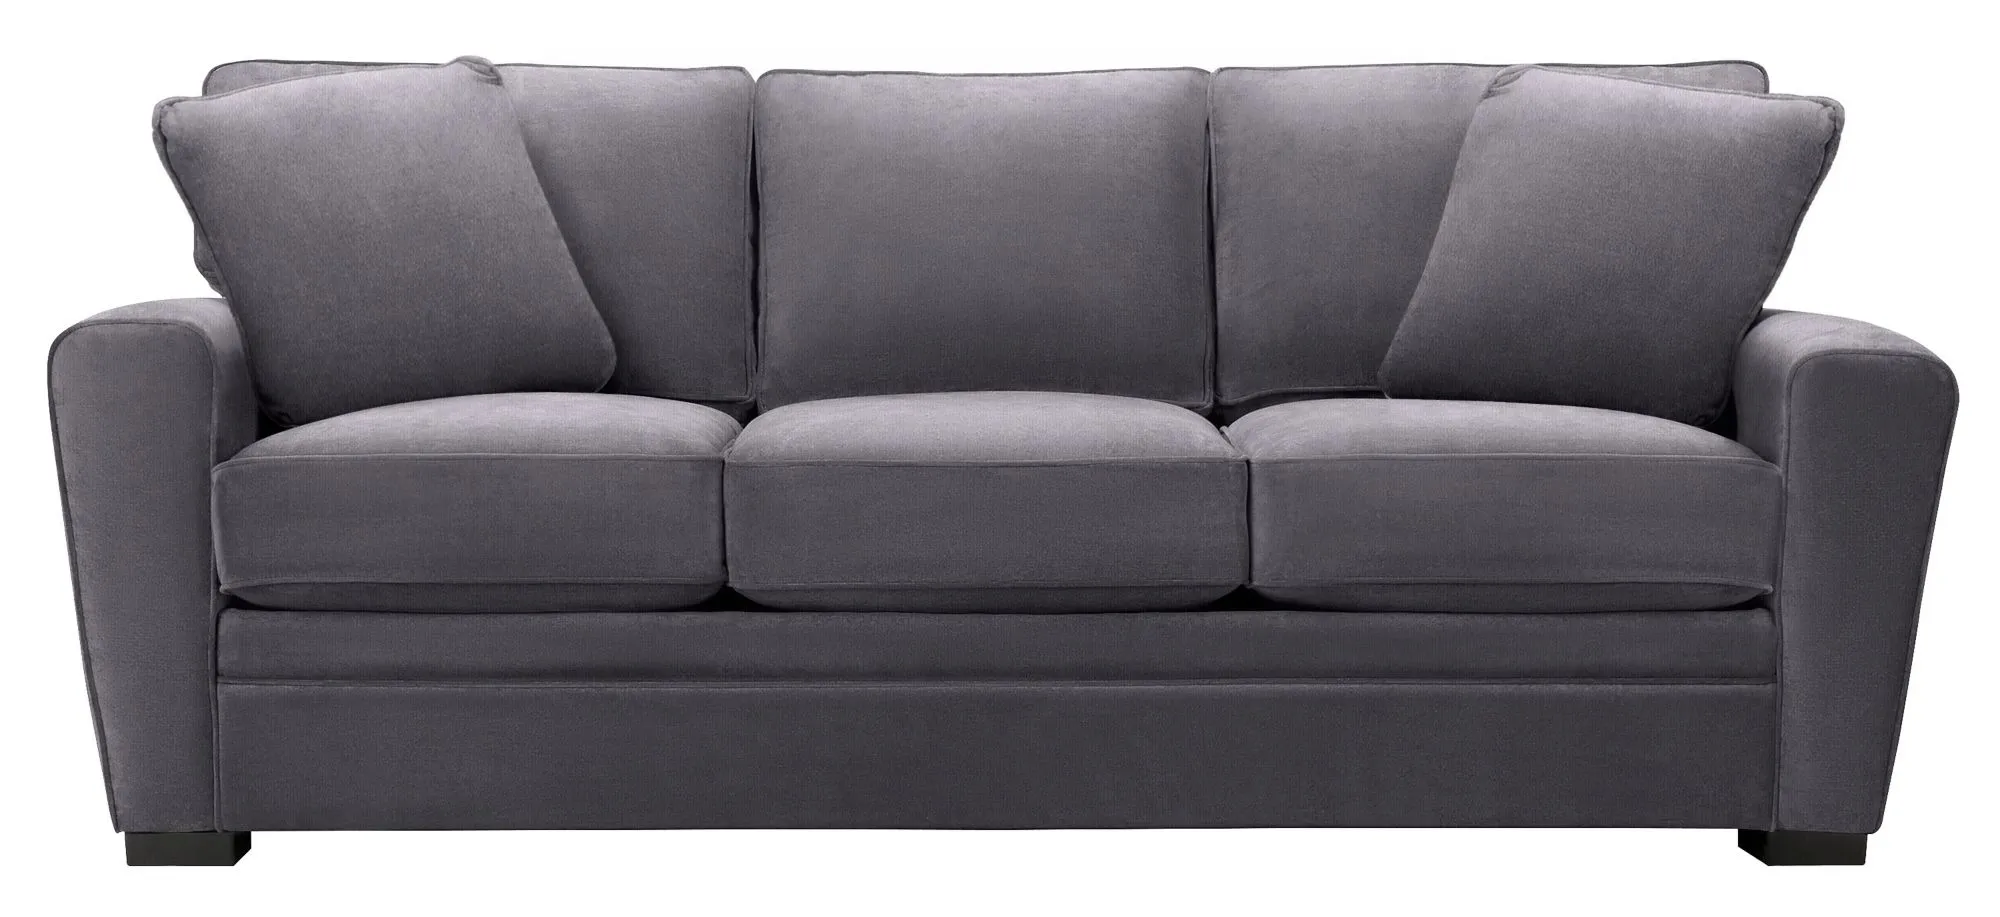 Artemis II Sofa in Gypsy Graphite by Jonathan Louis